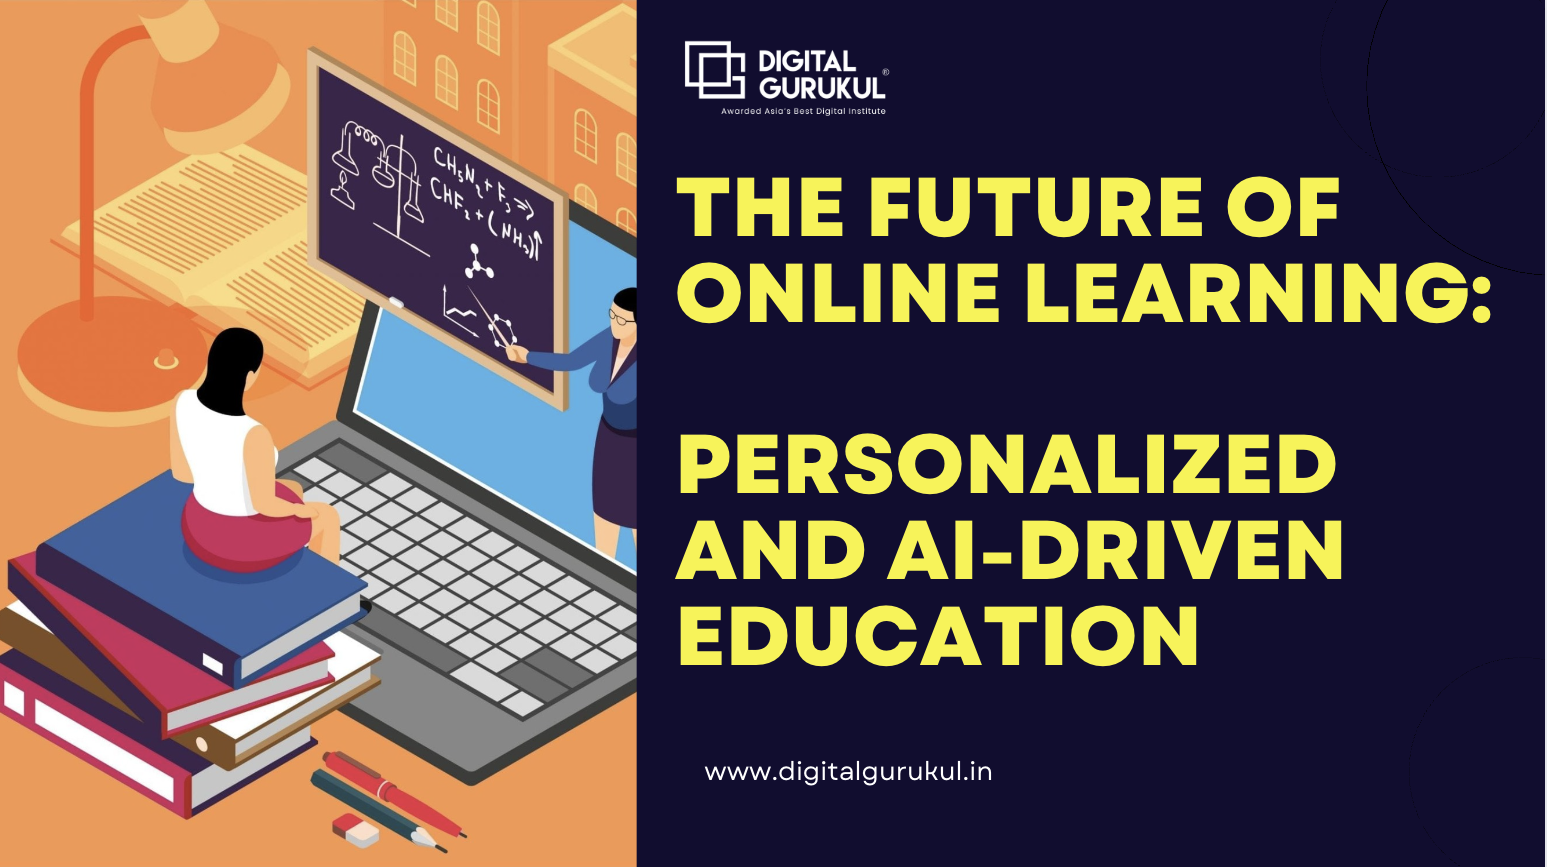 The Future of Online Learning: Personalized and AI-driven Education